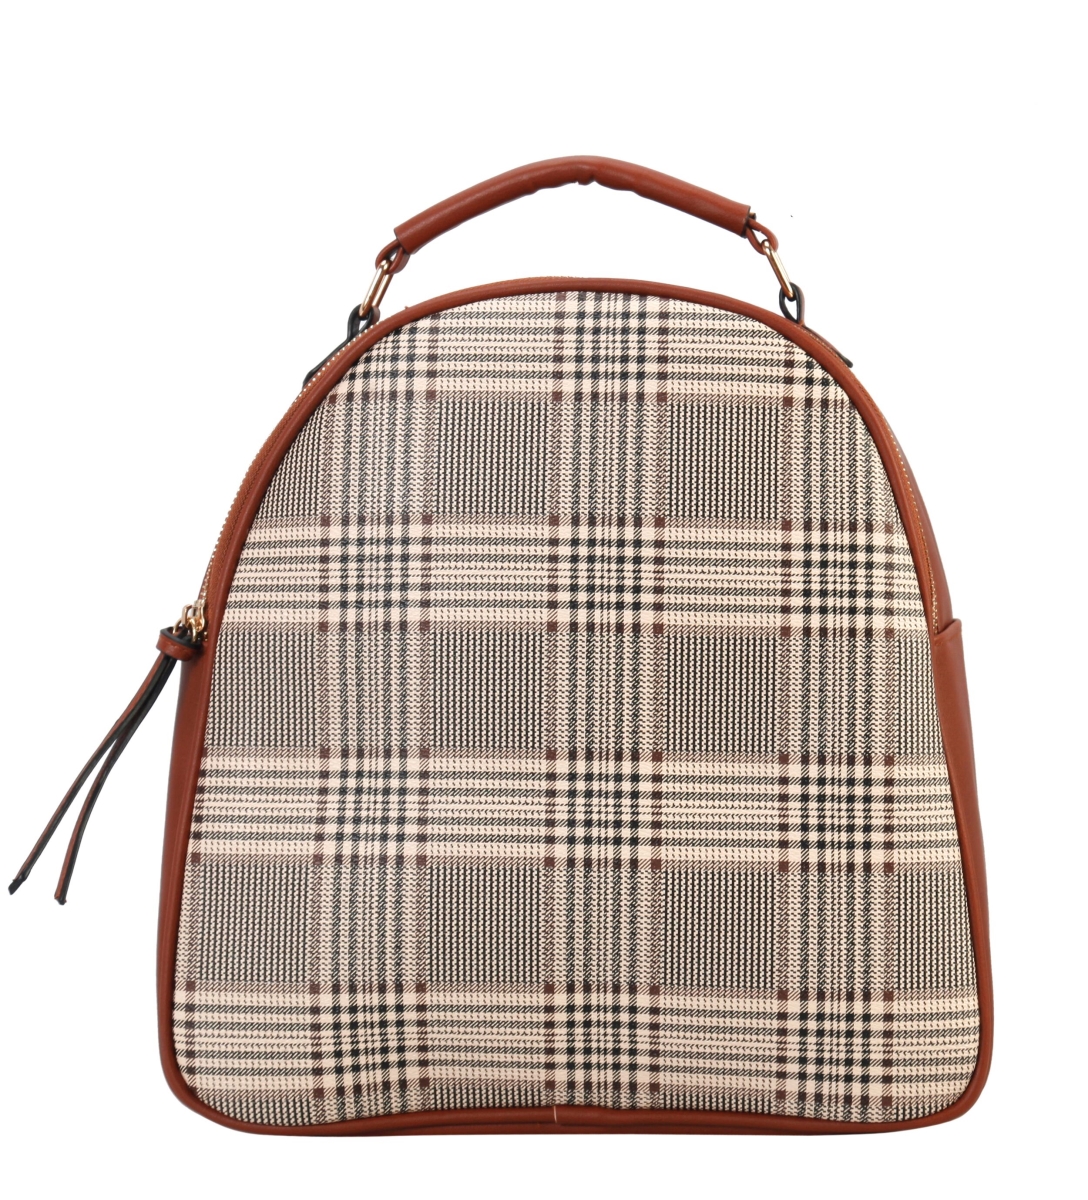 Agz-6692 Br Two Tone Classical Plaid Pattern Backpack - Brown